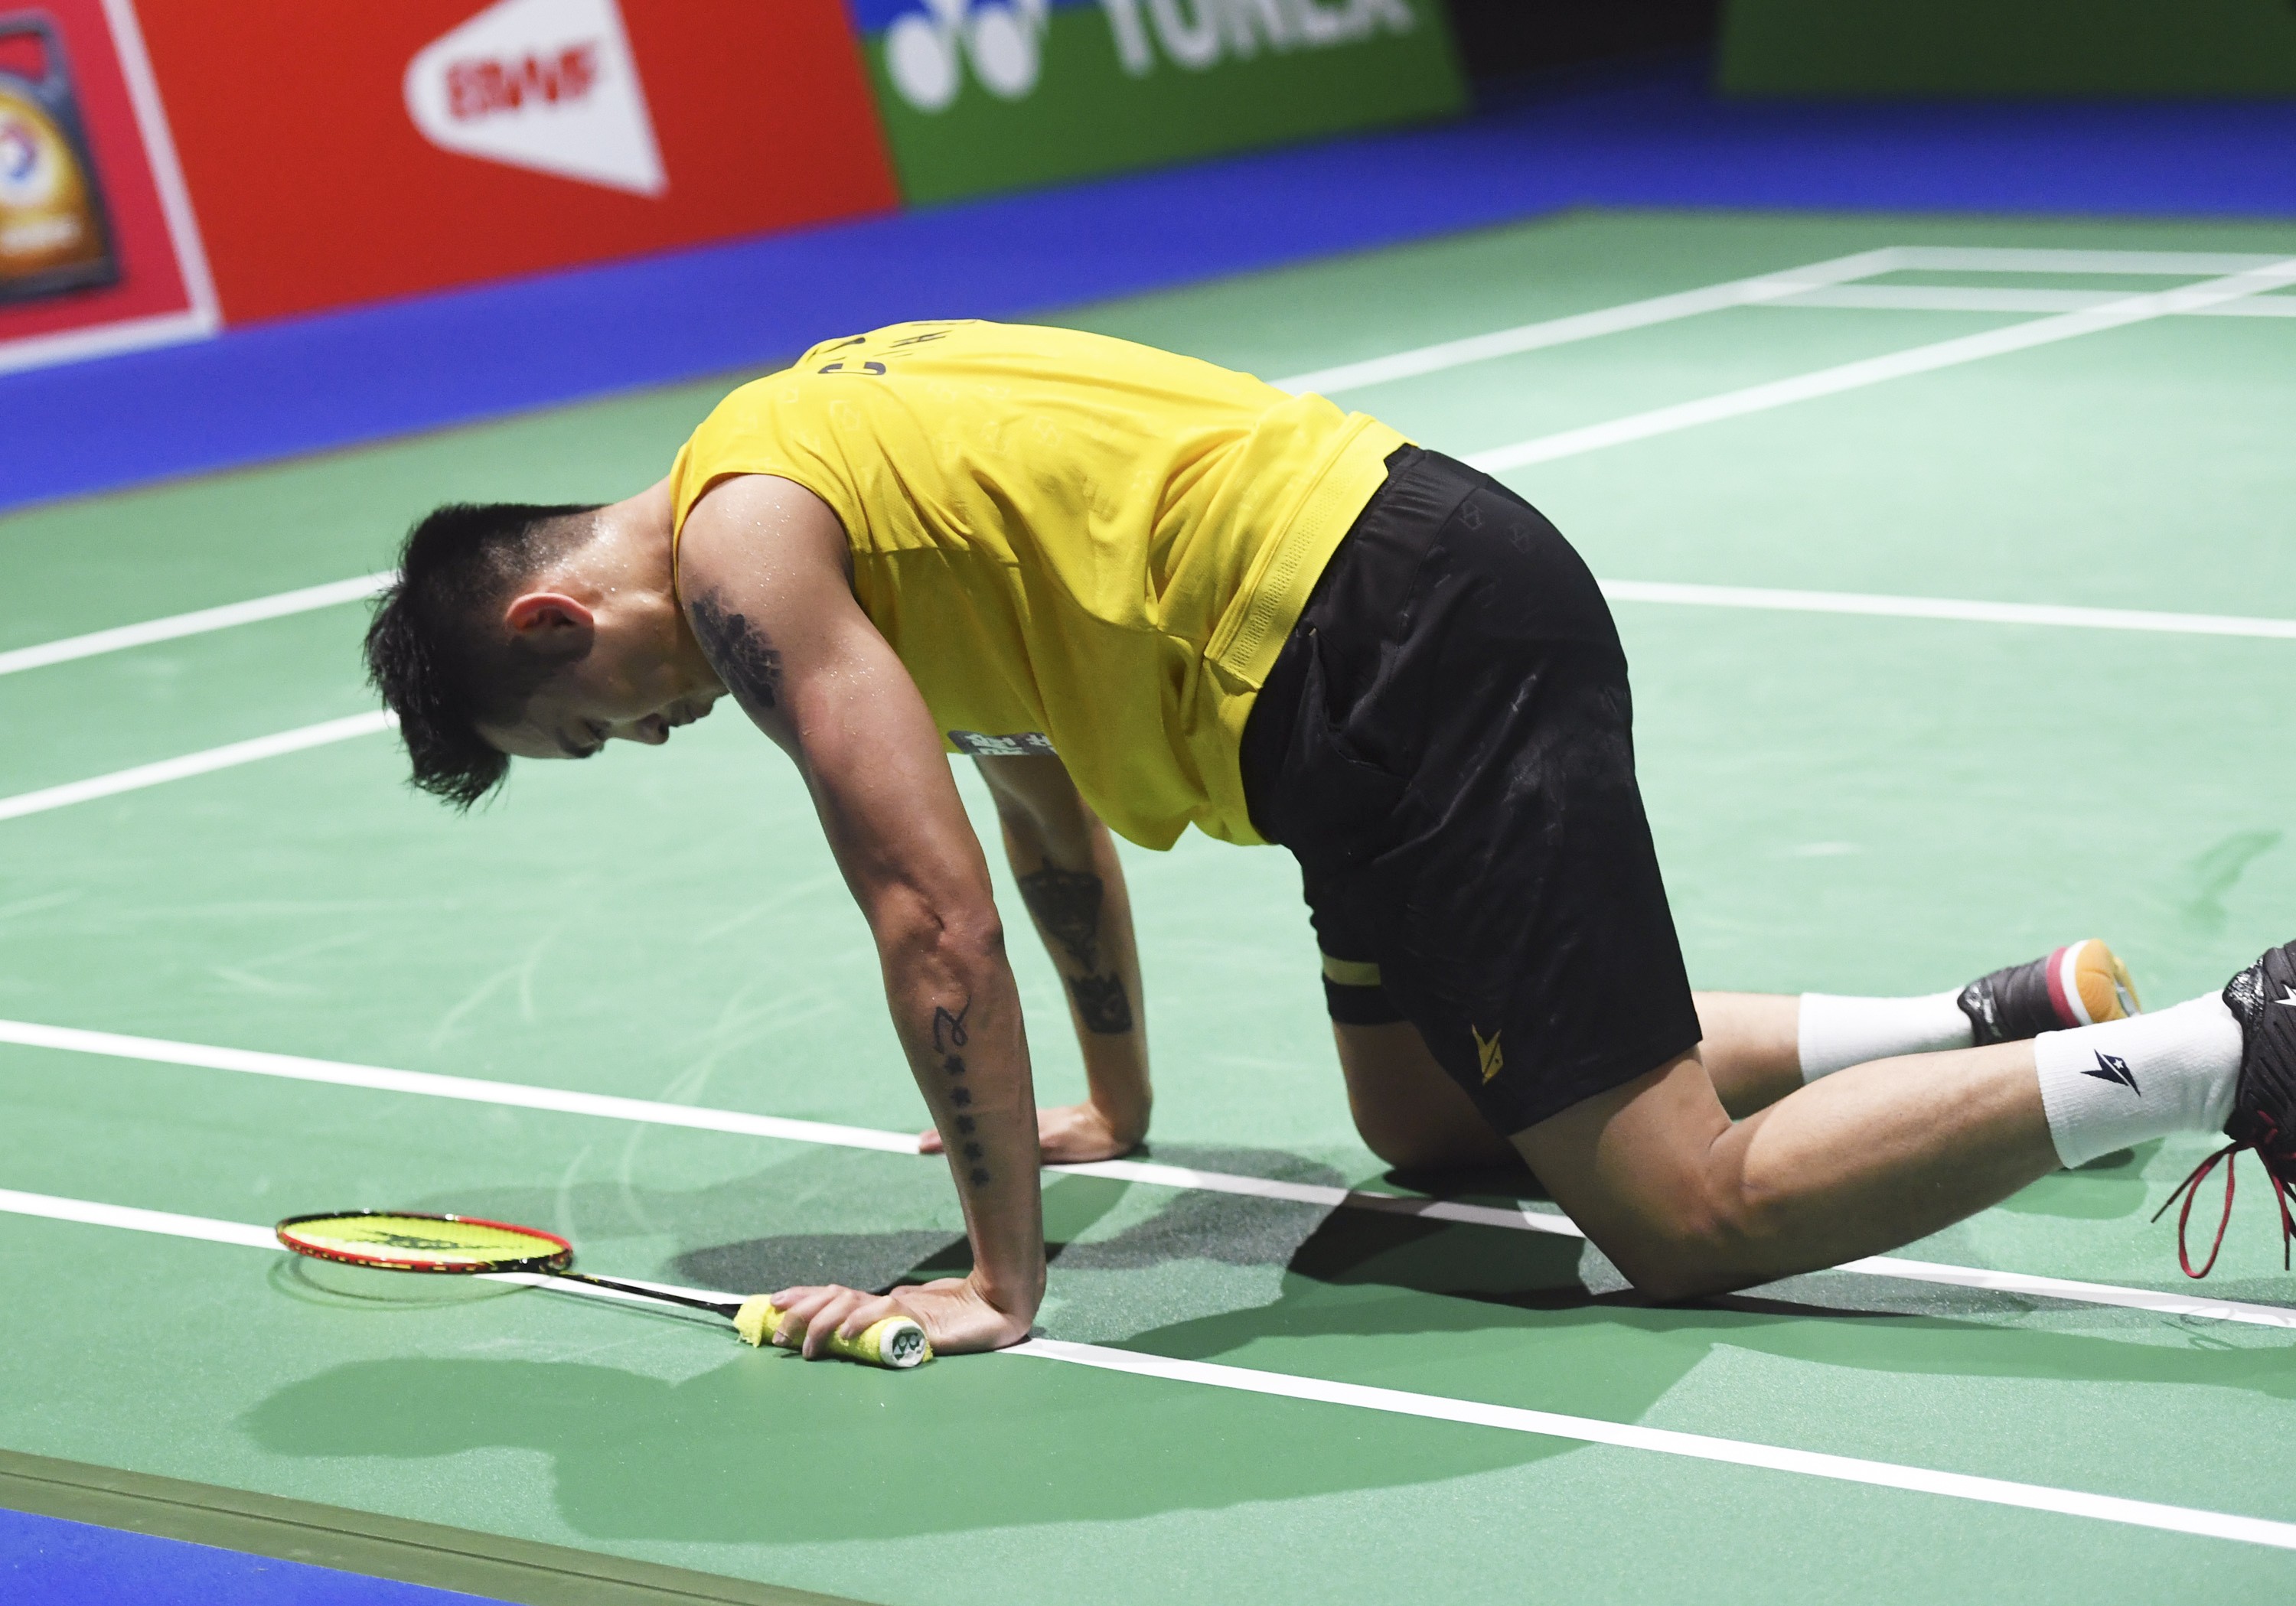 China's Lin Dan falls down during his second round match at 2019 BWF World Championships in Basel. Can he still qualify for his fifth Olympic Games in Tokyo? Photo: Xinhua